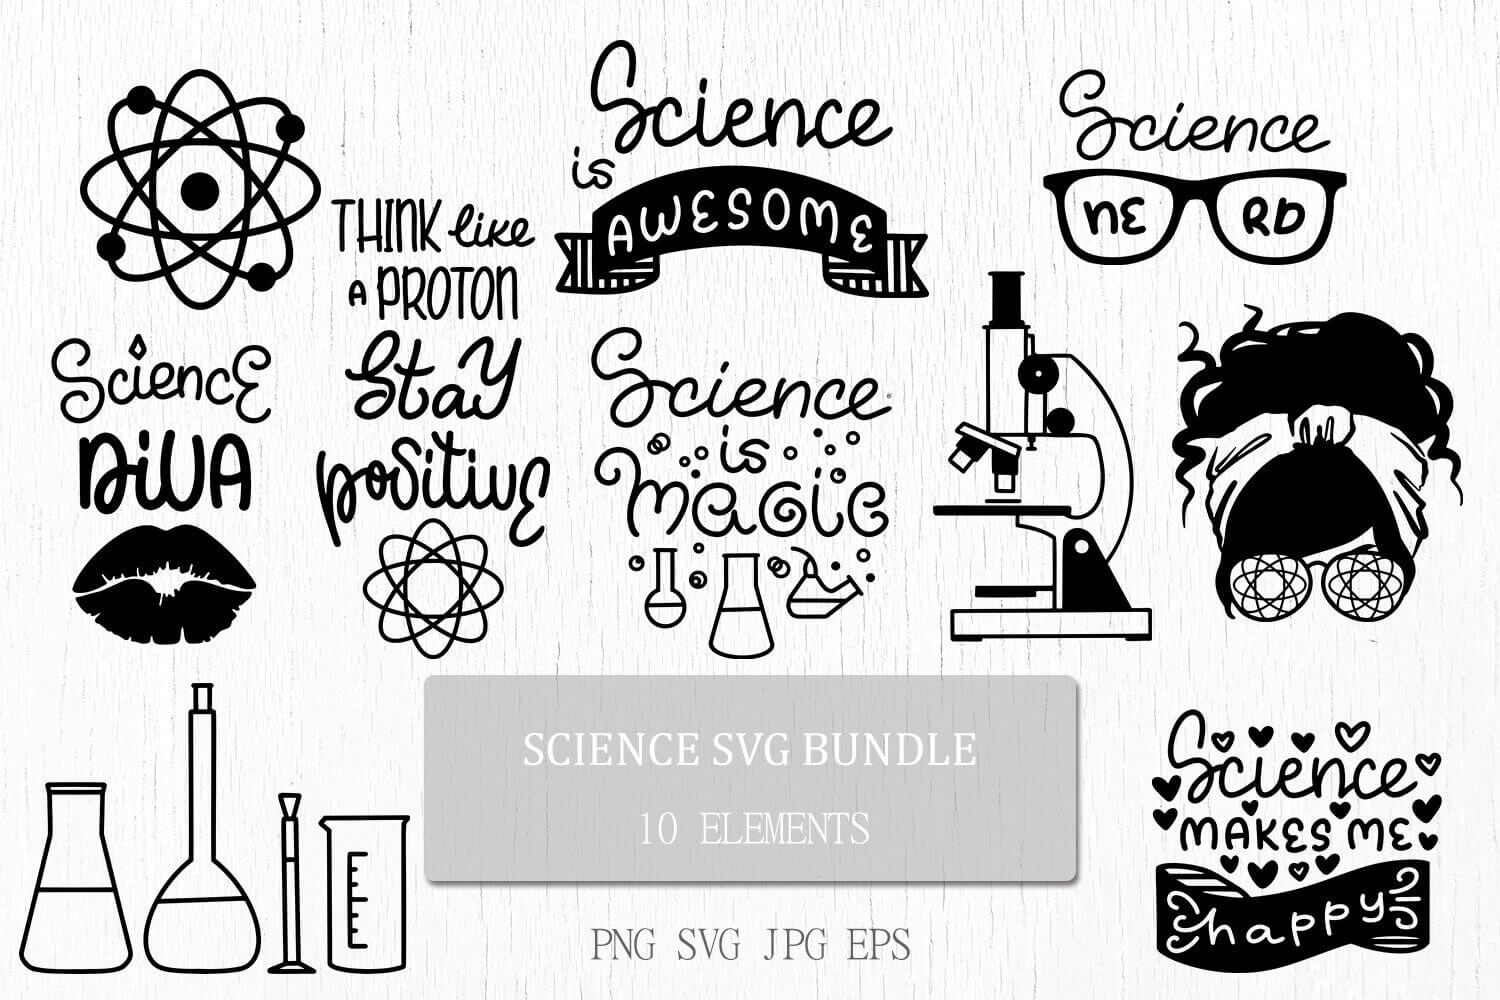 Scientific logos with inscriptions about science and scientific objects.